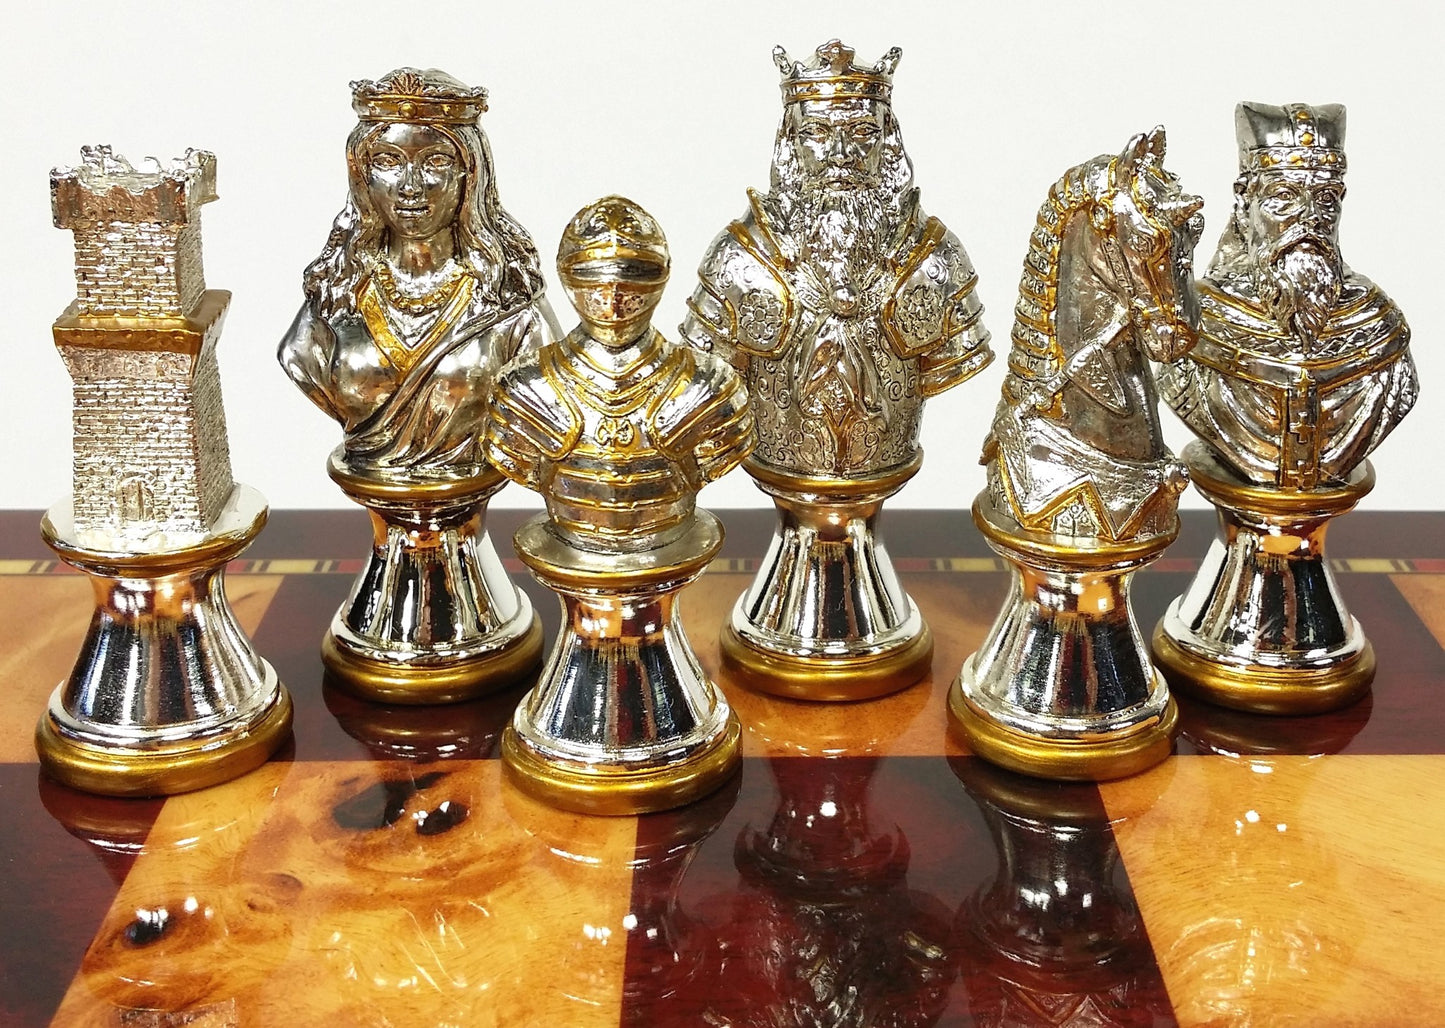 METAL Medieval Times Crusades Gold Silver Busts Chess Set Cherry Color Storage B